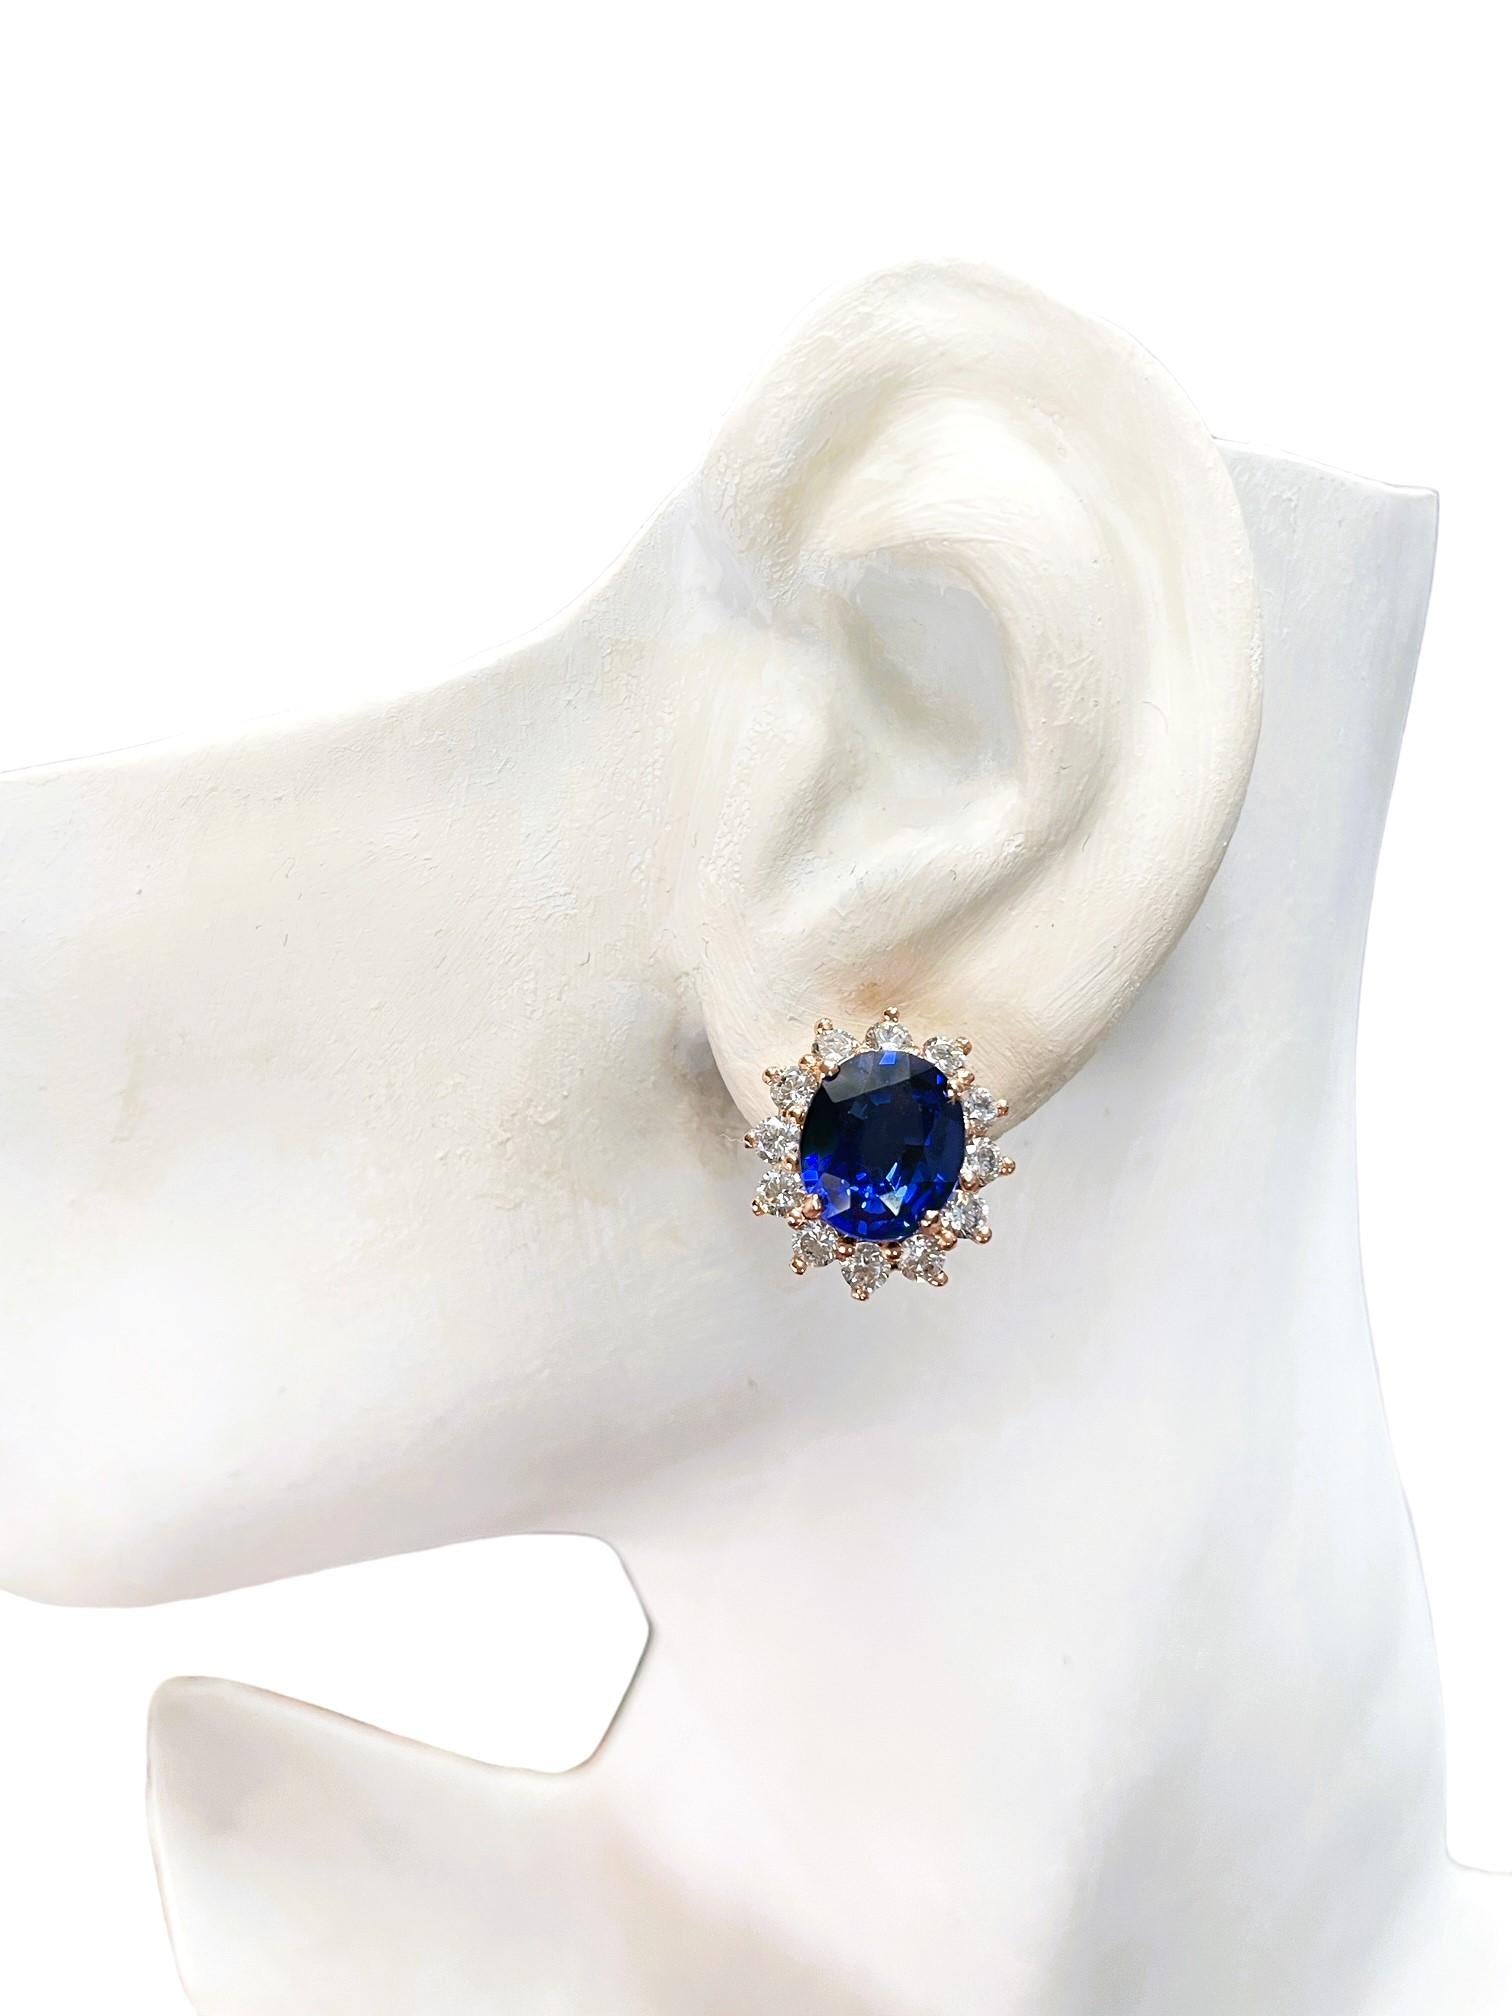 New African IF 8.7ct Kashmir Blue Sapphire Rgold Plated Sterling Post Earrings 2